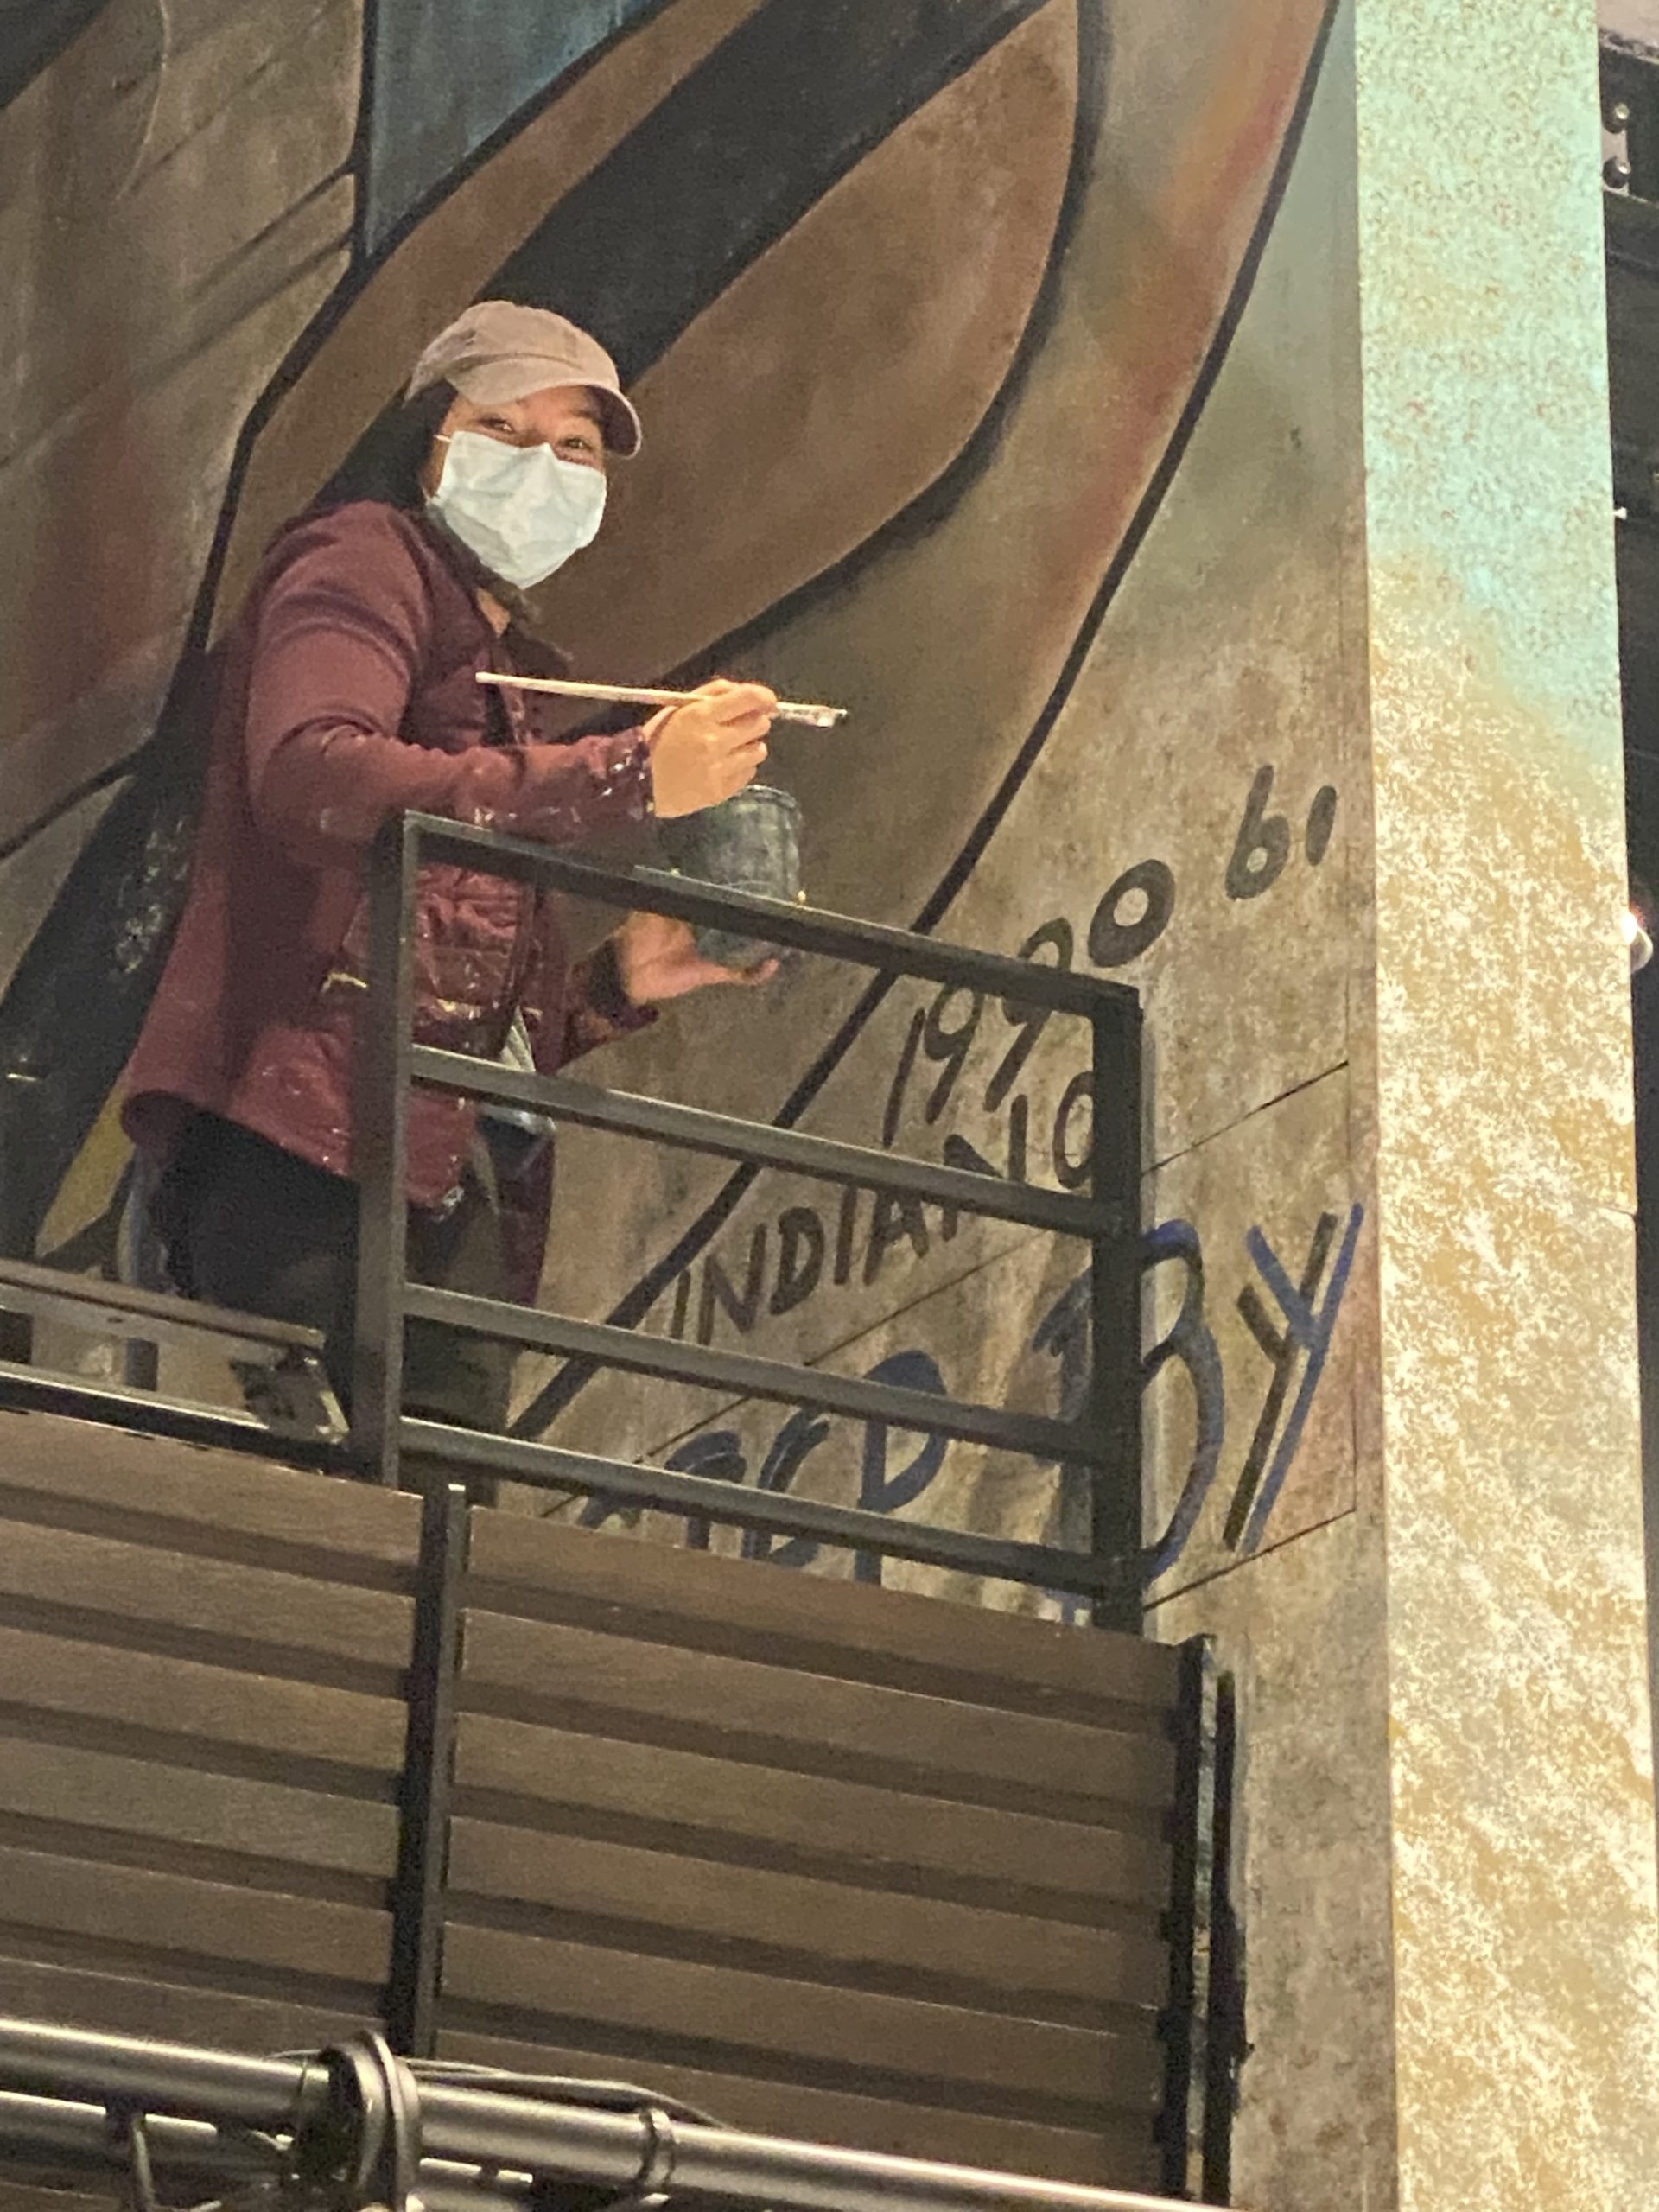 Woman wearing a face mask and a red jacket is holding a paintbrush and is standing next to a wall she is painting.